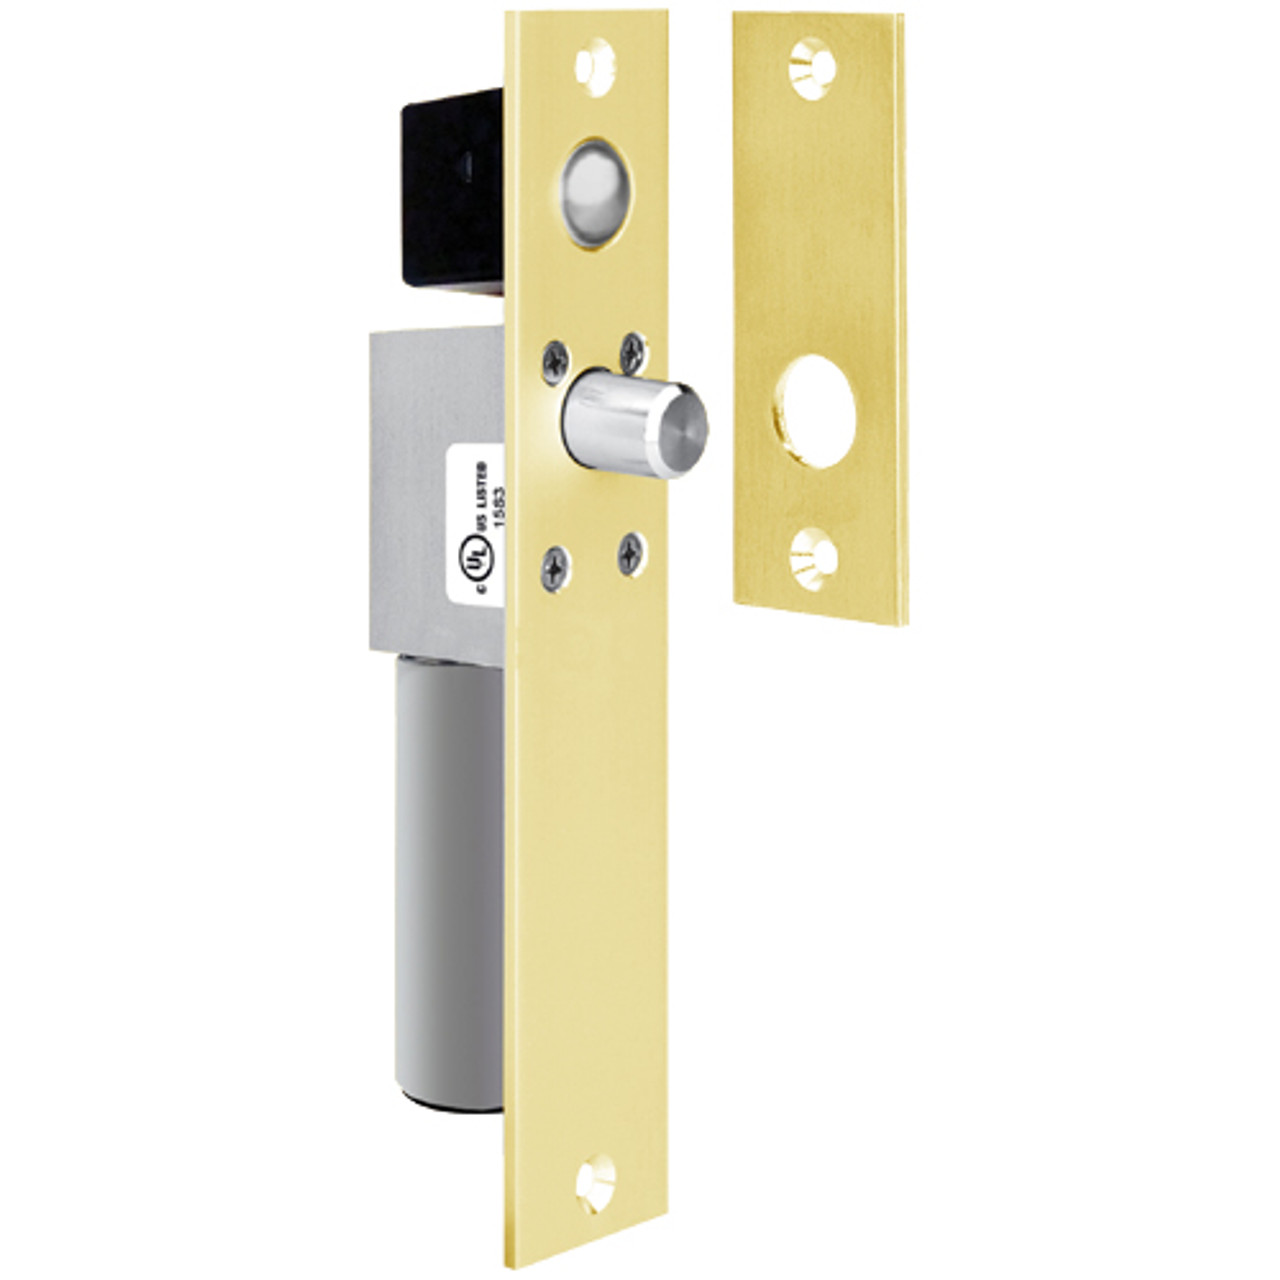 1490AICB SDC Fits 1-1/2 inche Frame Non UL FailSafe Spacesaver Mortise Bolt Lock with Bolt Position Sensor in Bright Brass